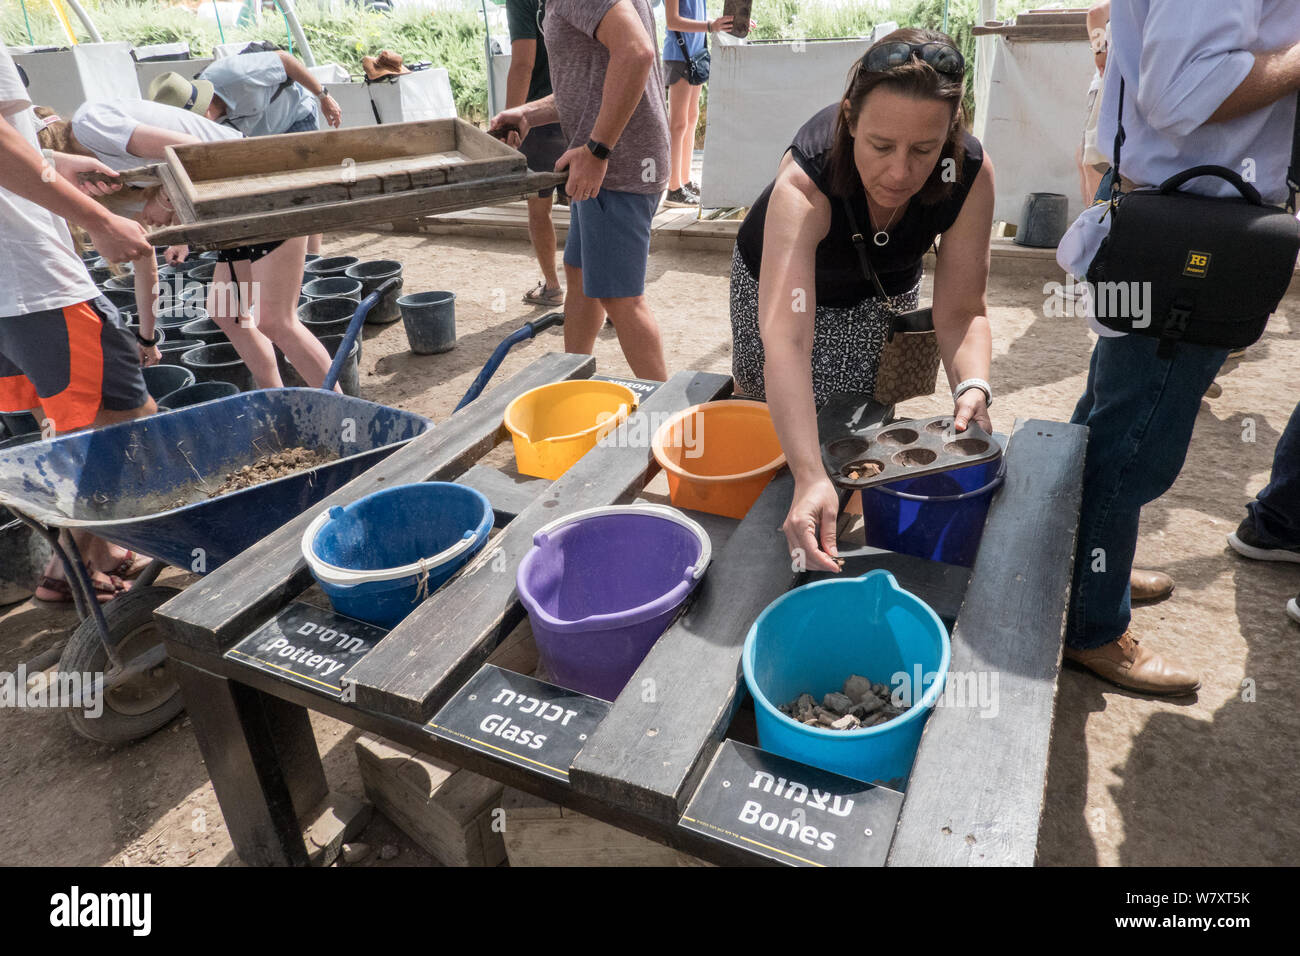 Jerusalem, Israel. 7th August, 2019. Visitors get first hand experience at the Emek Tzurim Temple Mount Sifting Project sifting through debris dug up by the Muslim Waqf on Temple Mount and dumped in the Kidron Valley. Numerous Second Temple archaeological remains have been discovered. Archaeologists accuse the Waqf of engaging in illegally destroying remains of Jewish buildings and artifacts in a deliberate attempt to erase historic Jewish links to the Temple Mount. Religious Jews are in the midst of observing the 'Three Weeks' or 'Bein HaMetzarim', a period of mourning over the destruction of Stock Photo